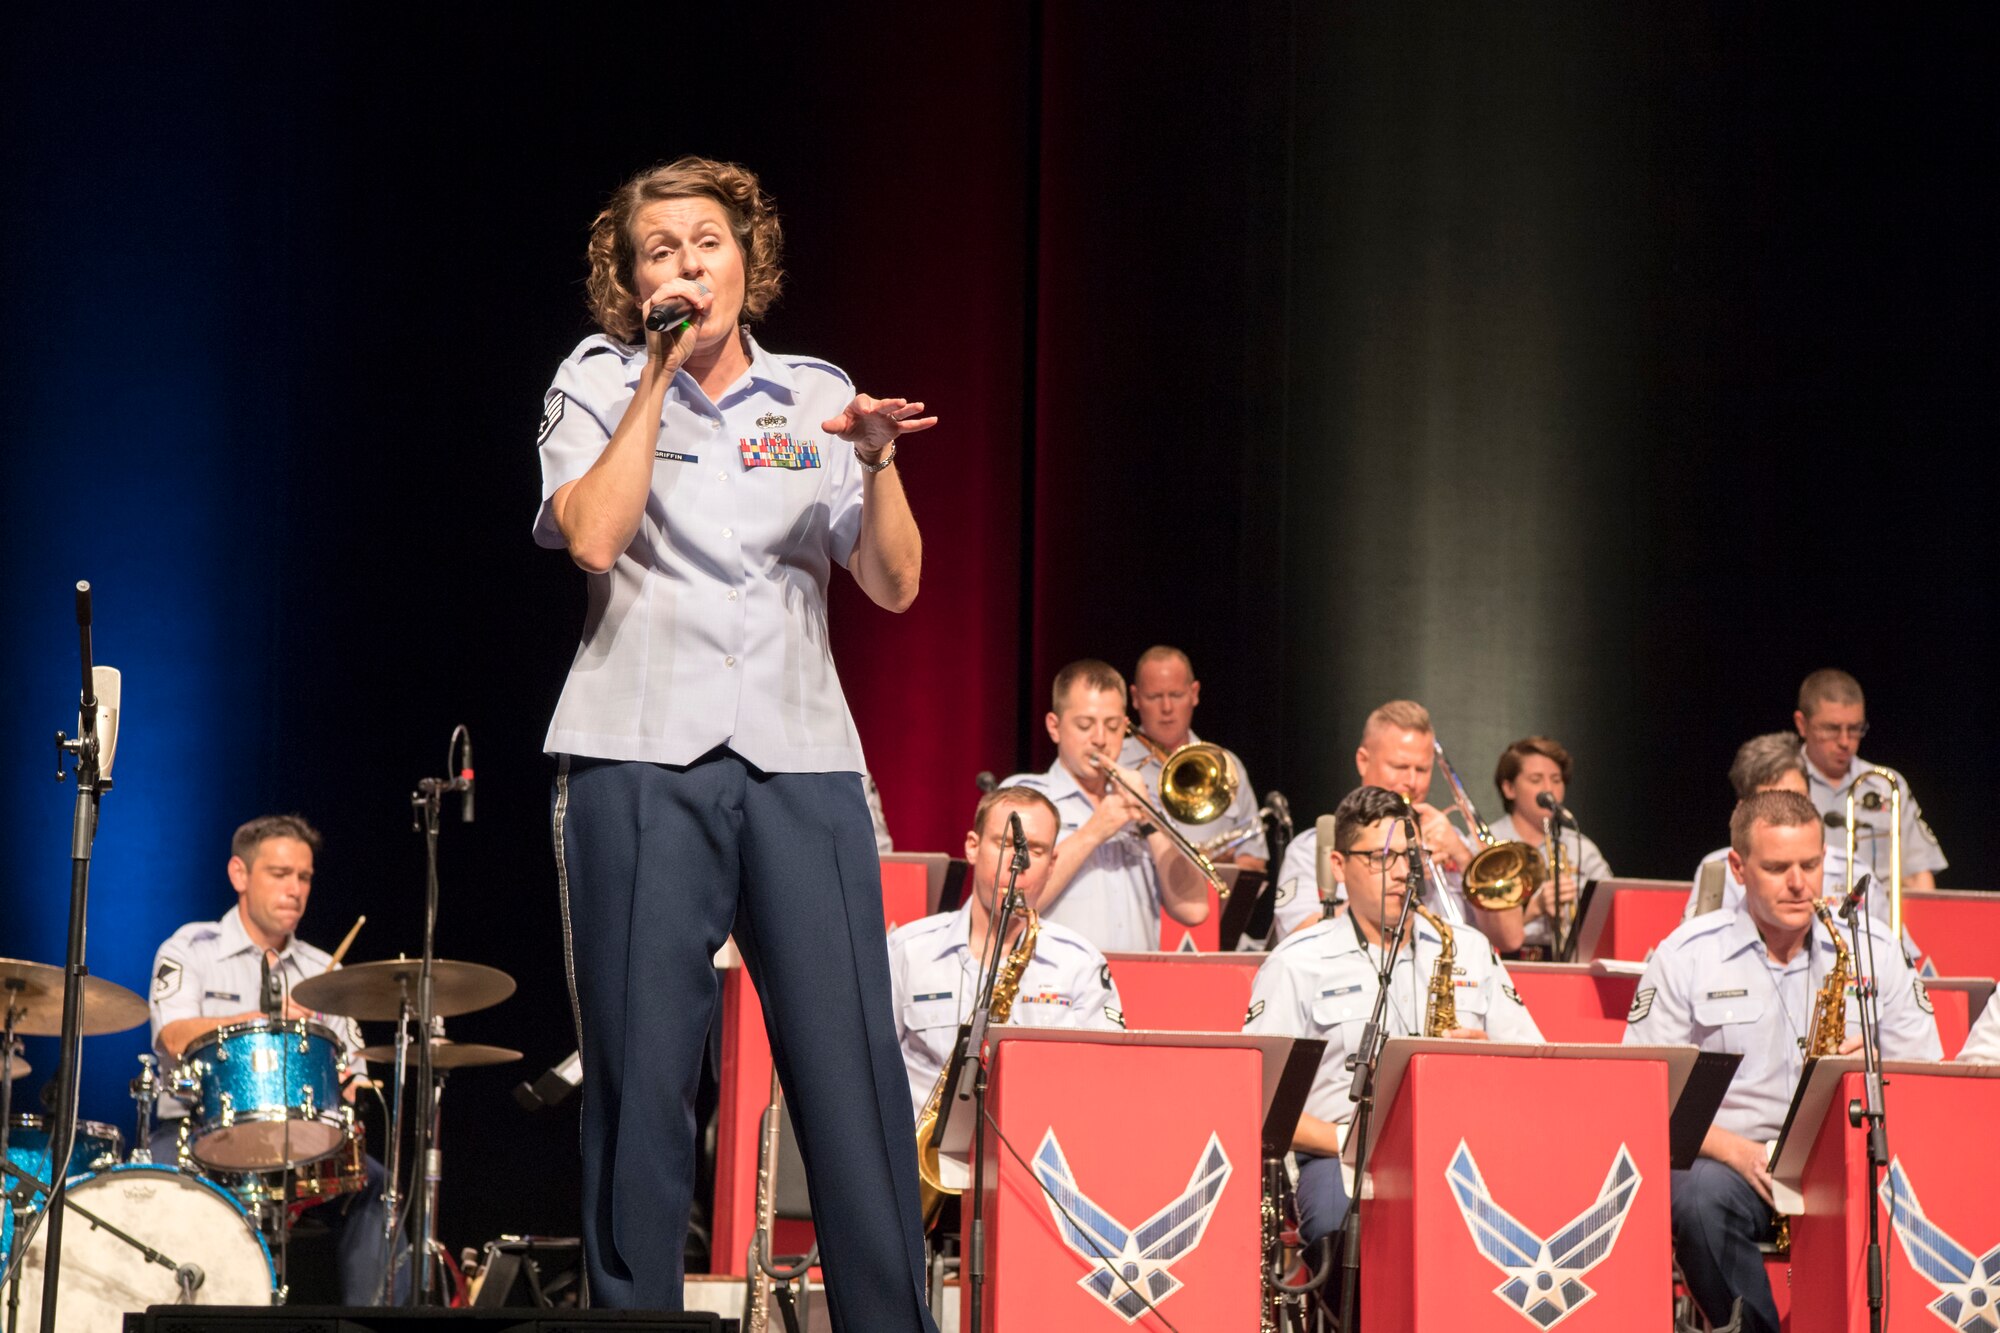 Staff Sgt. Joanne Griffin, U.S. Air Force Band of Flight vocalist, sings during a concert at the Honeywell Center in Wabash, Indiana Sept. 10, 2019. The Band of Flight partnered with the Band of Mid-America to bring back the ‘big band jazz feel’. (U.S. Air Force photo/Master Sgt. Ben Mota)